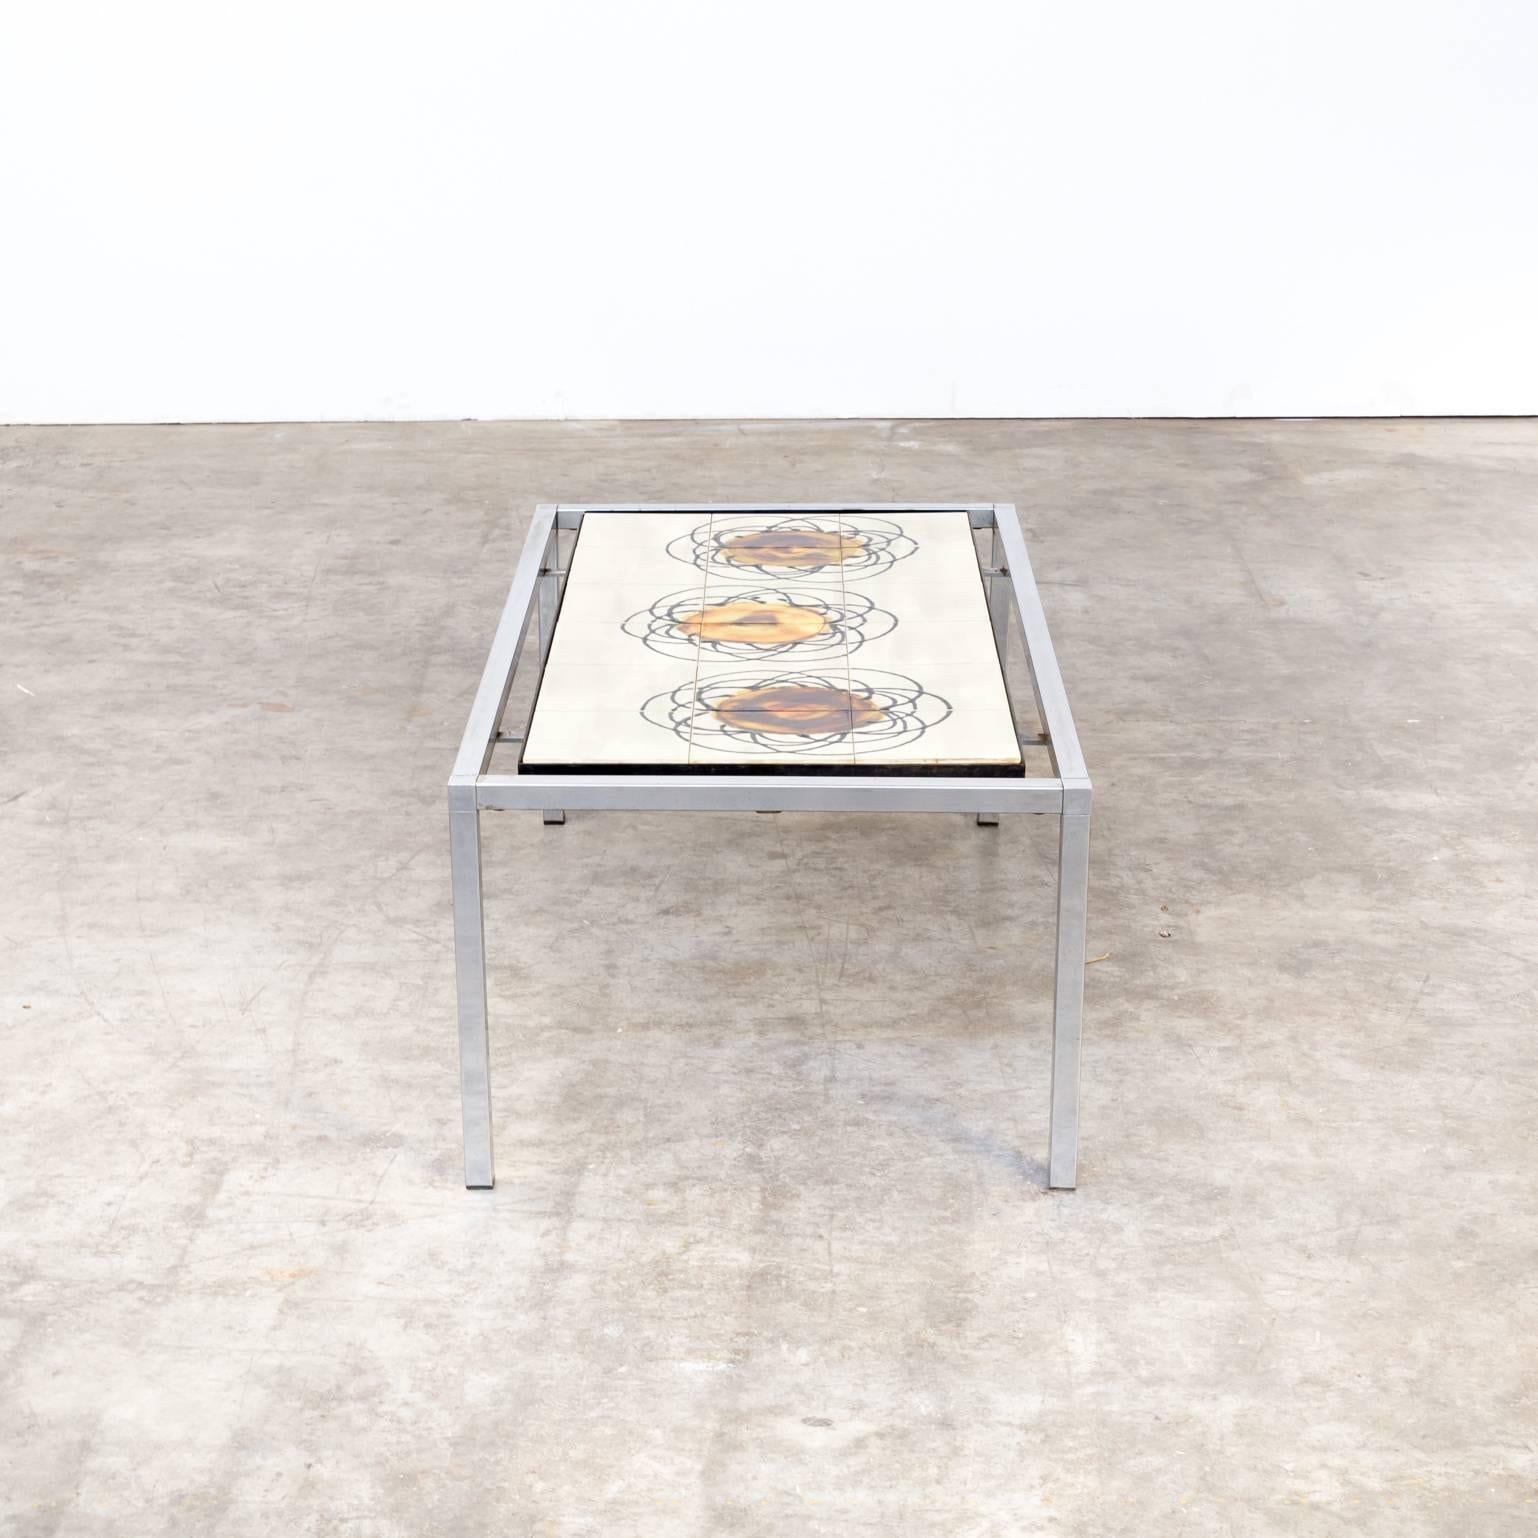 1960s Juliette Belarti hand-painted coffee table. Good condition consistent with age and use.